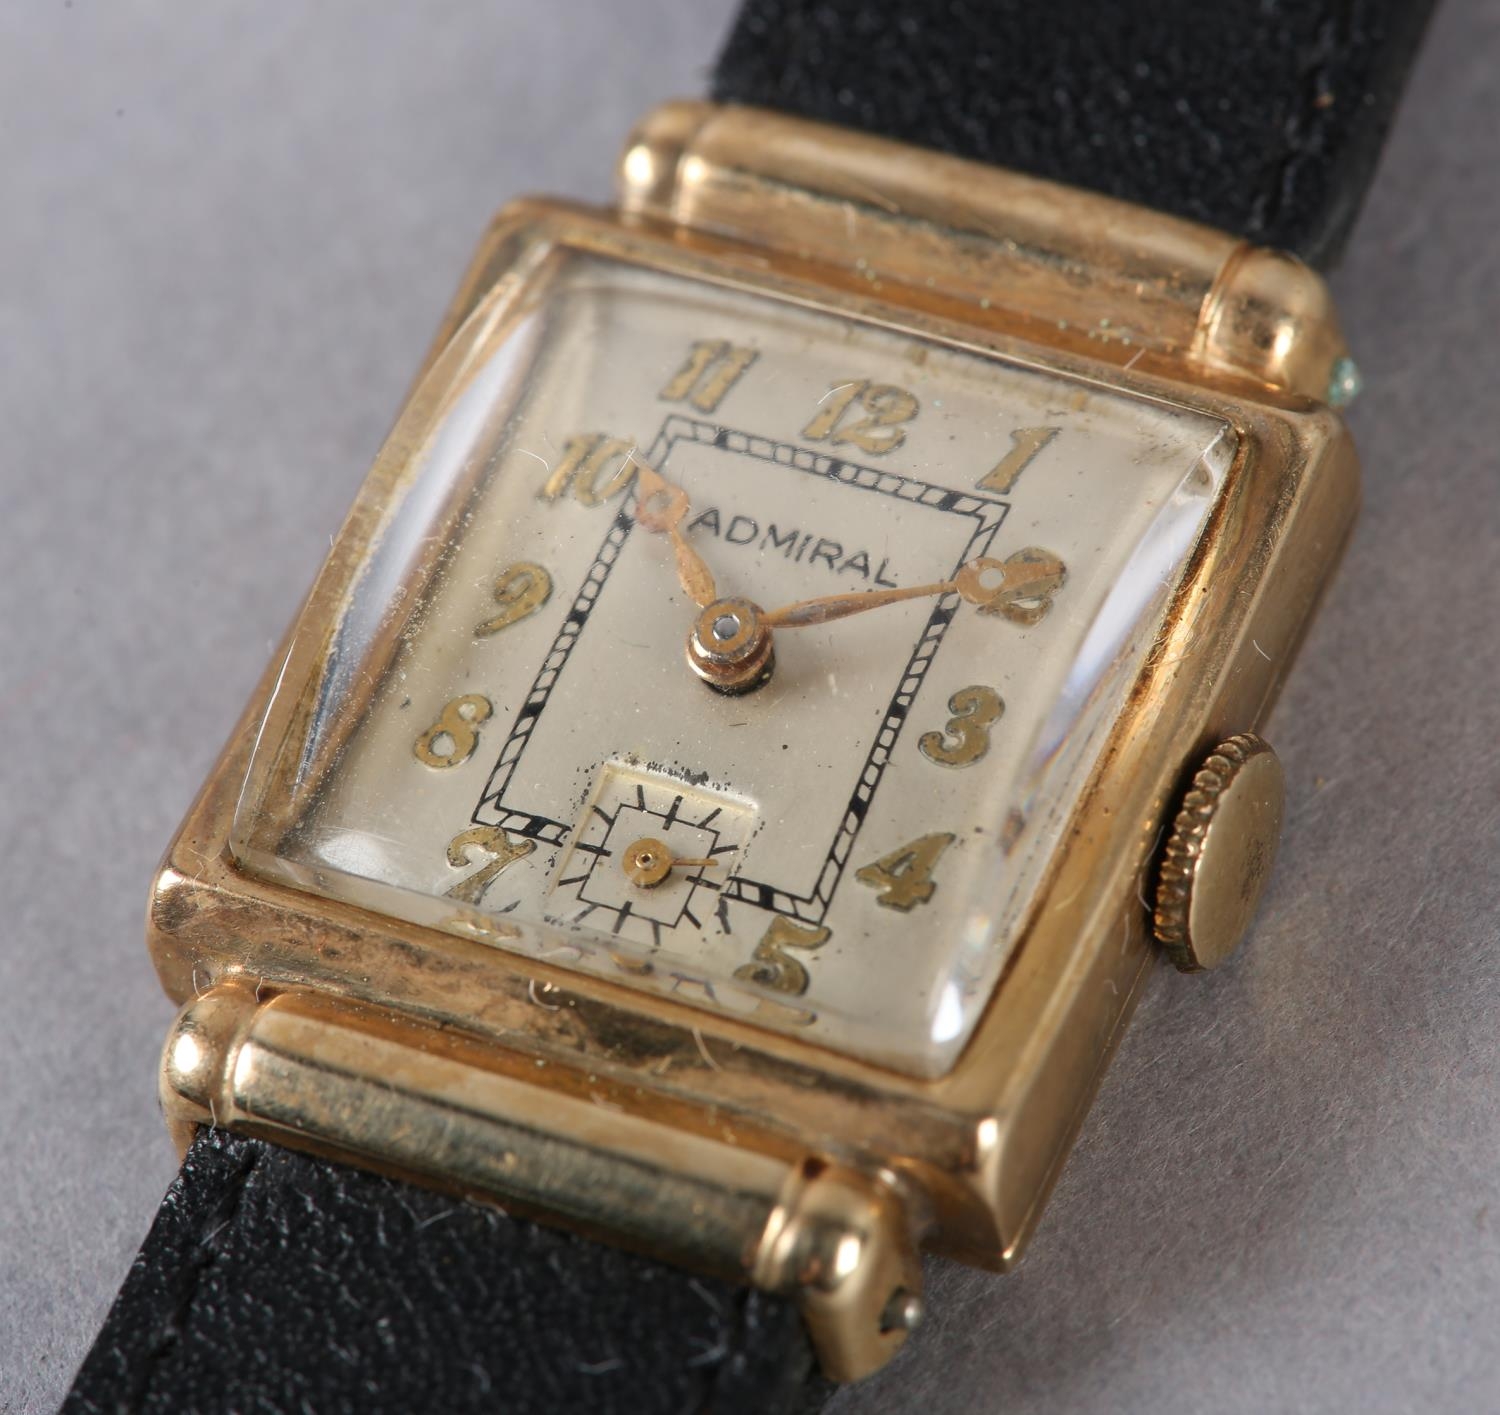 AN ADMIRAL LADY's DRESS WRISTWATCH, c1940, in rectangular 14ct gold case with barrel lugs, Swiss - Image 2 of 3